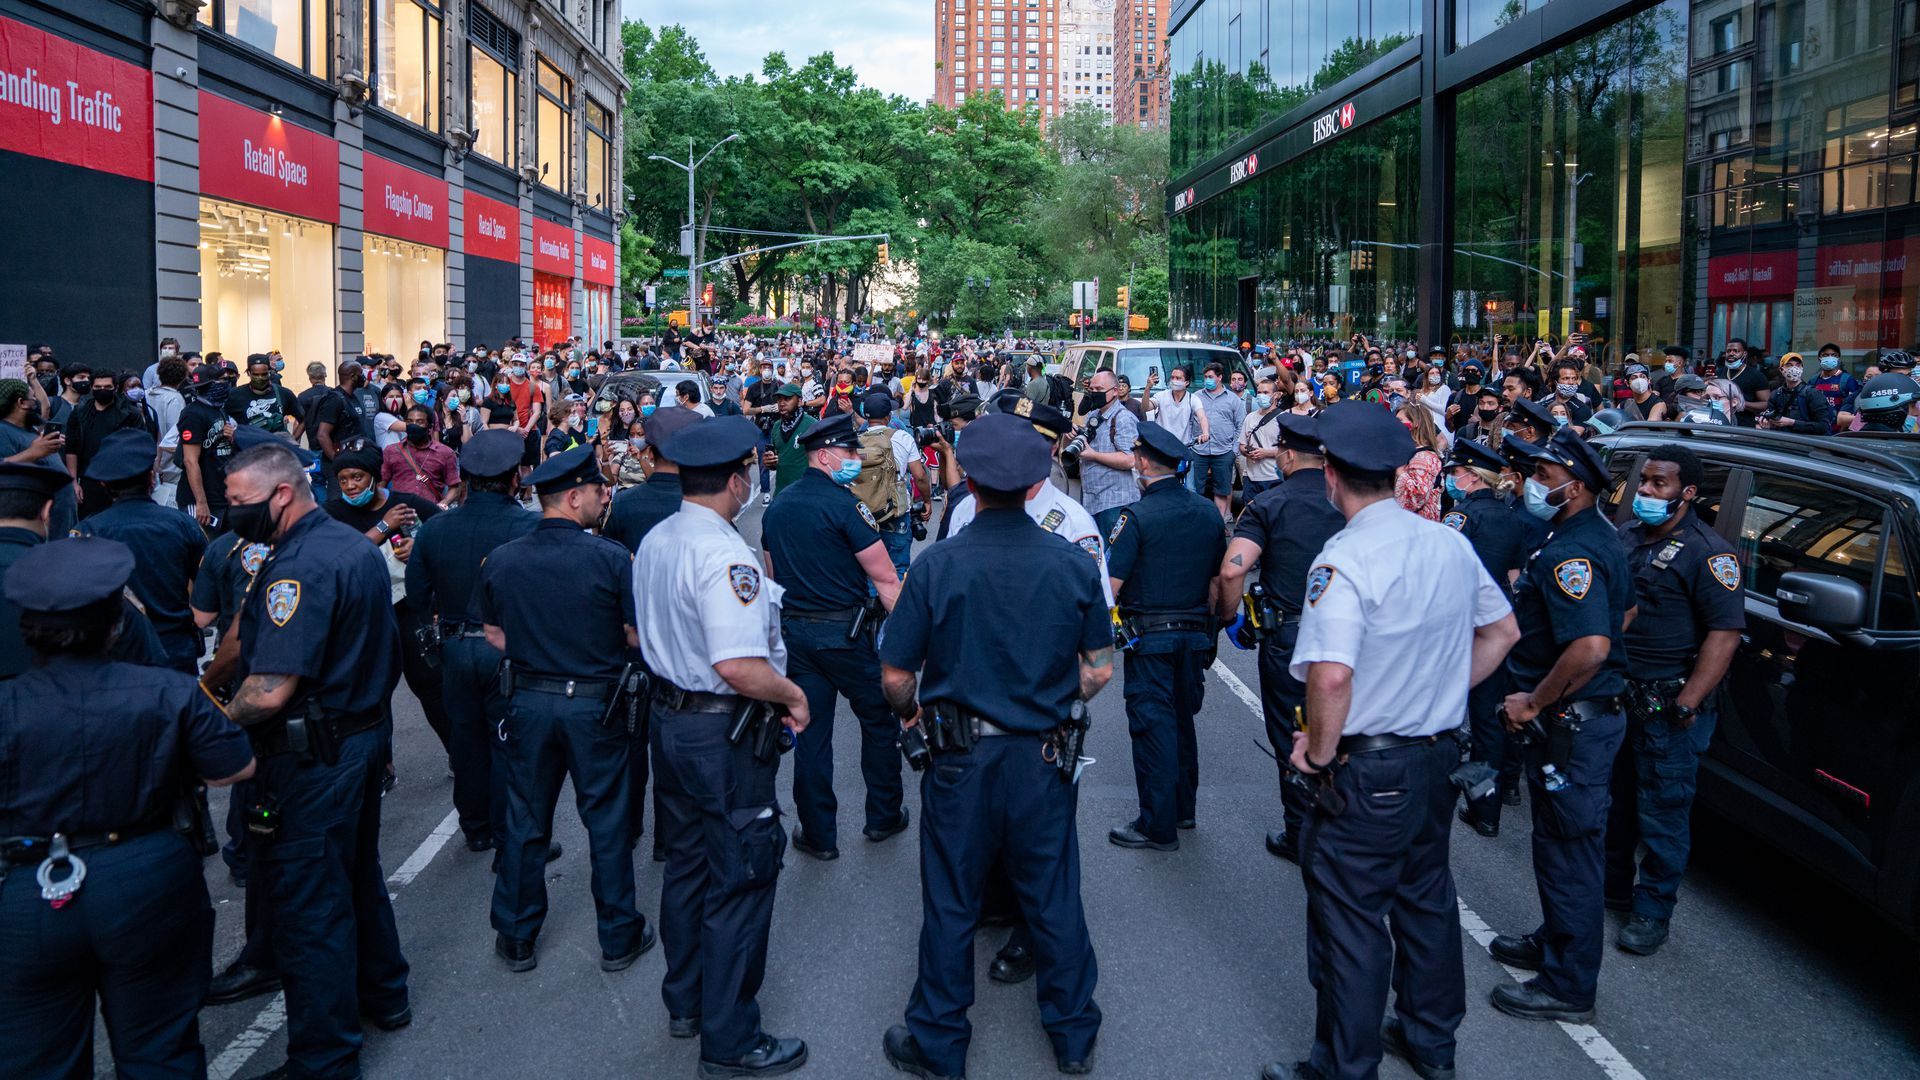 Police and protesters face off in New York City 